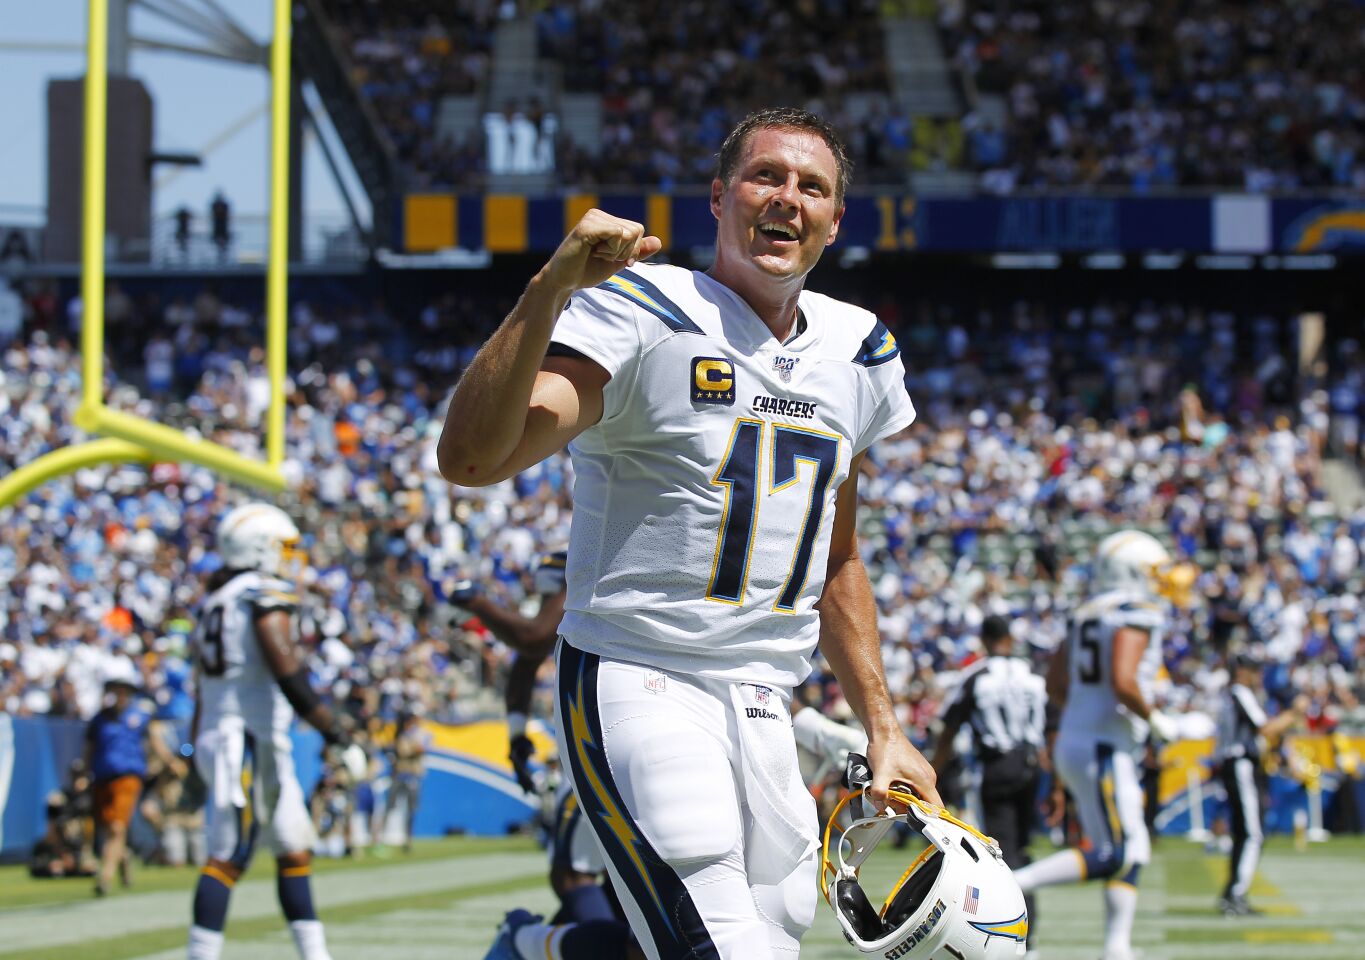 Los Angeles Chargers Philip Rivers after he threw a touchdown pass to Keenan Allen against the Indianapolis Colts in the 2nd quarter in Carson on Sept. 8, 2019.